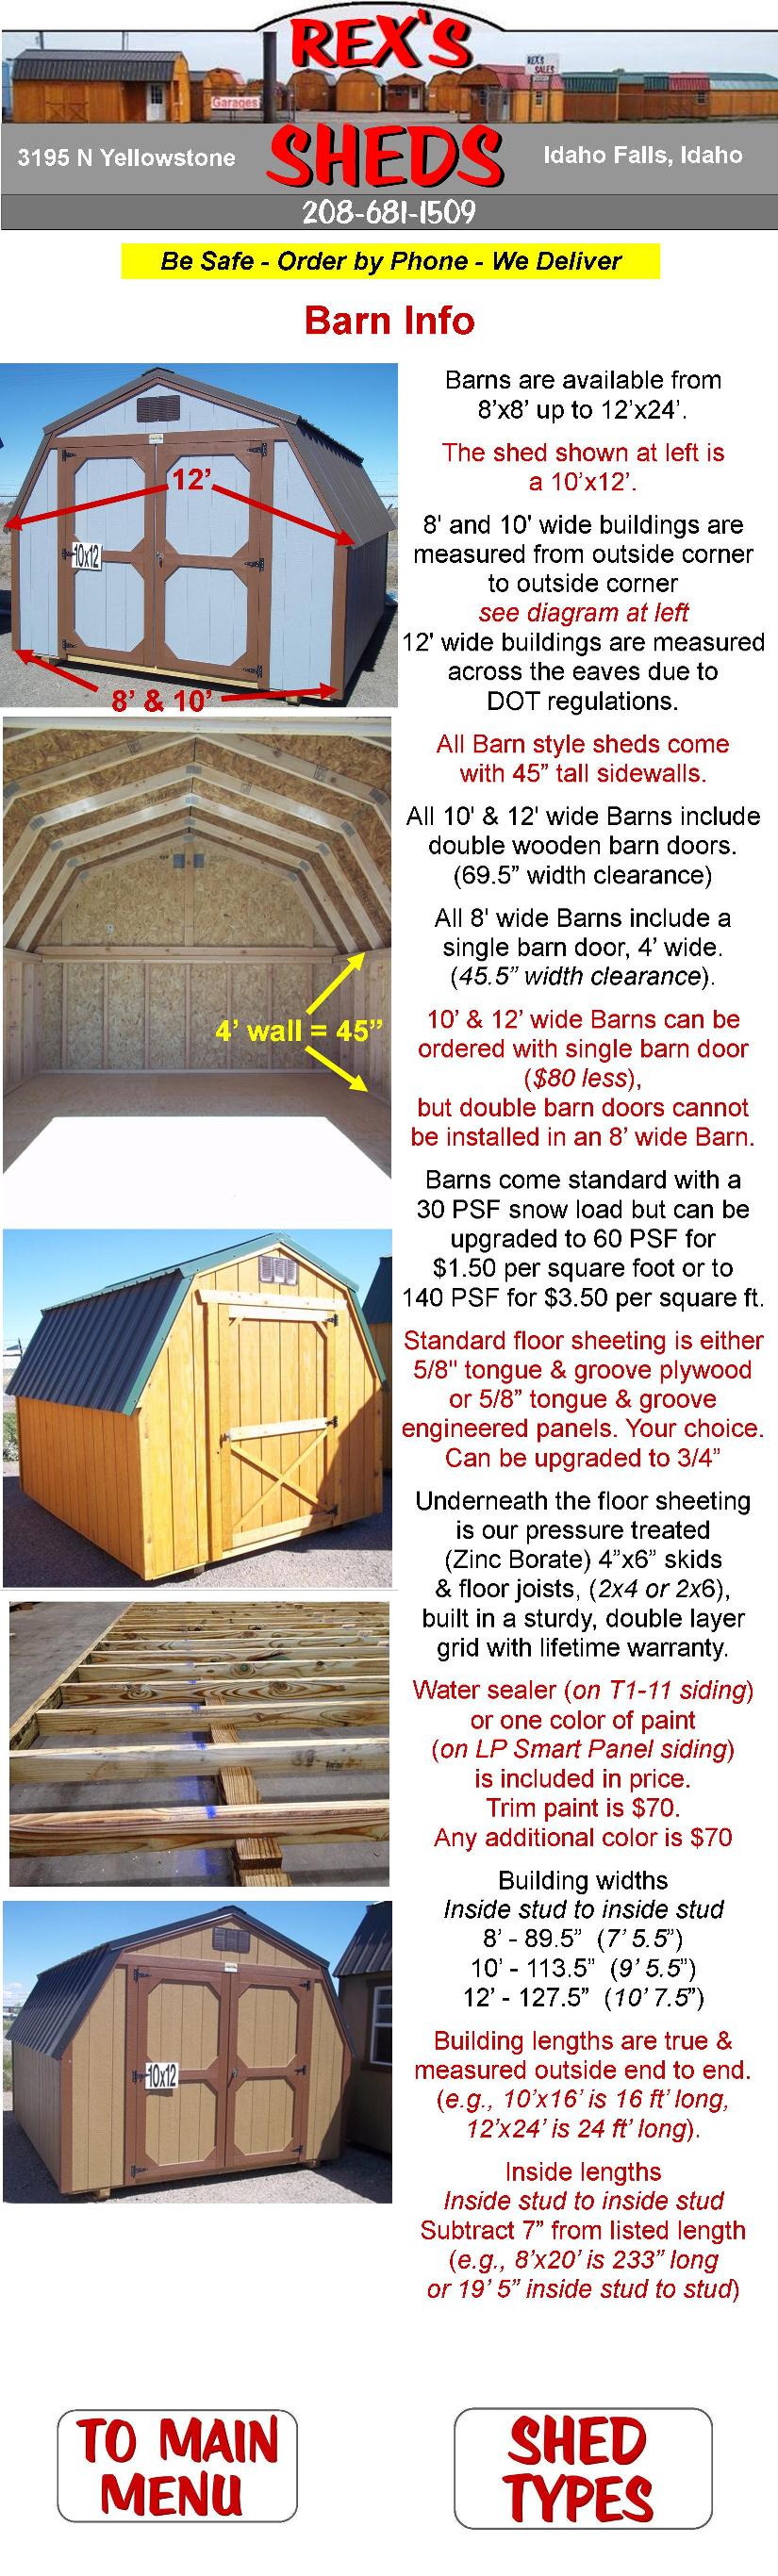 image_of_and_info_on_barn_style_storage_shed_including_construction_style_snow_load_capacity_measurements_doors_more